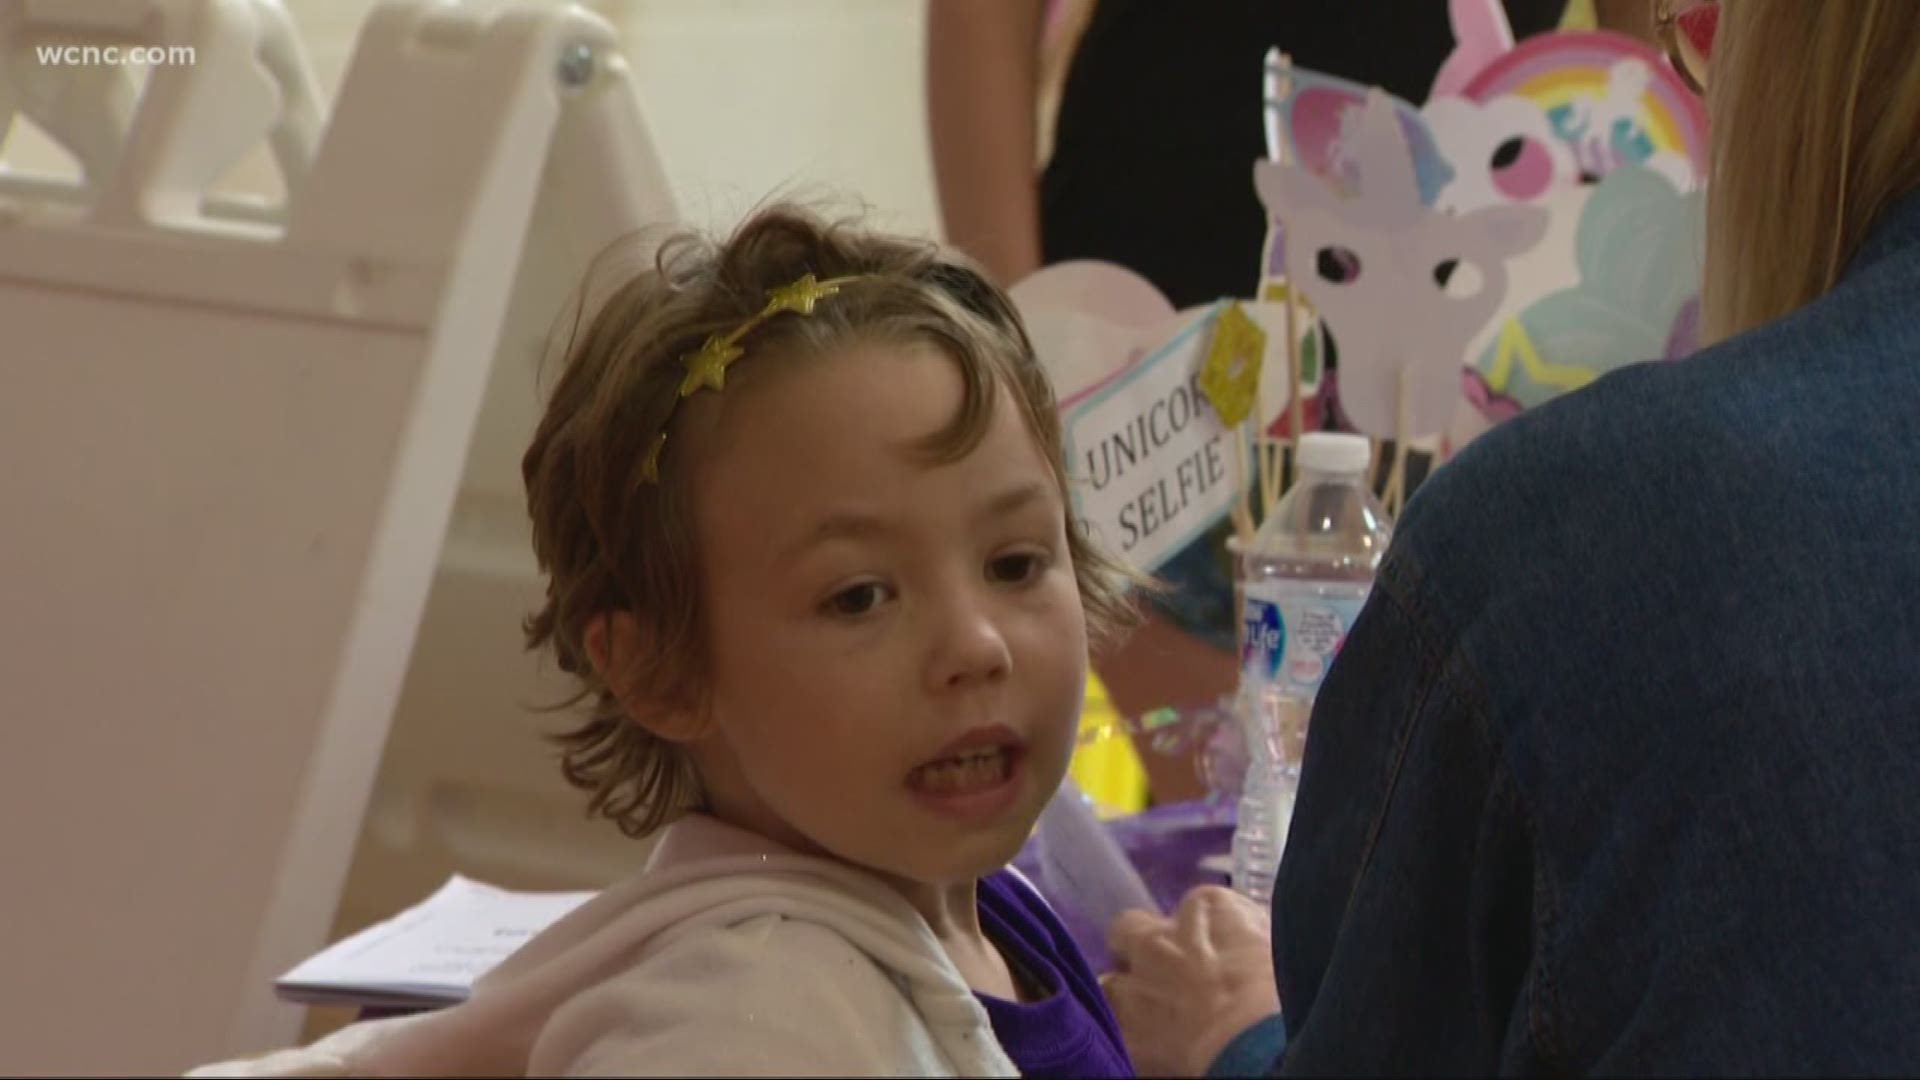 A local community is paying it forward this weekend to honor a little girl battling cancer.